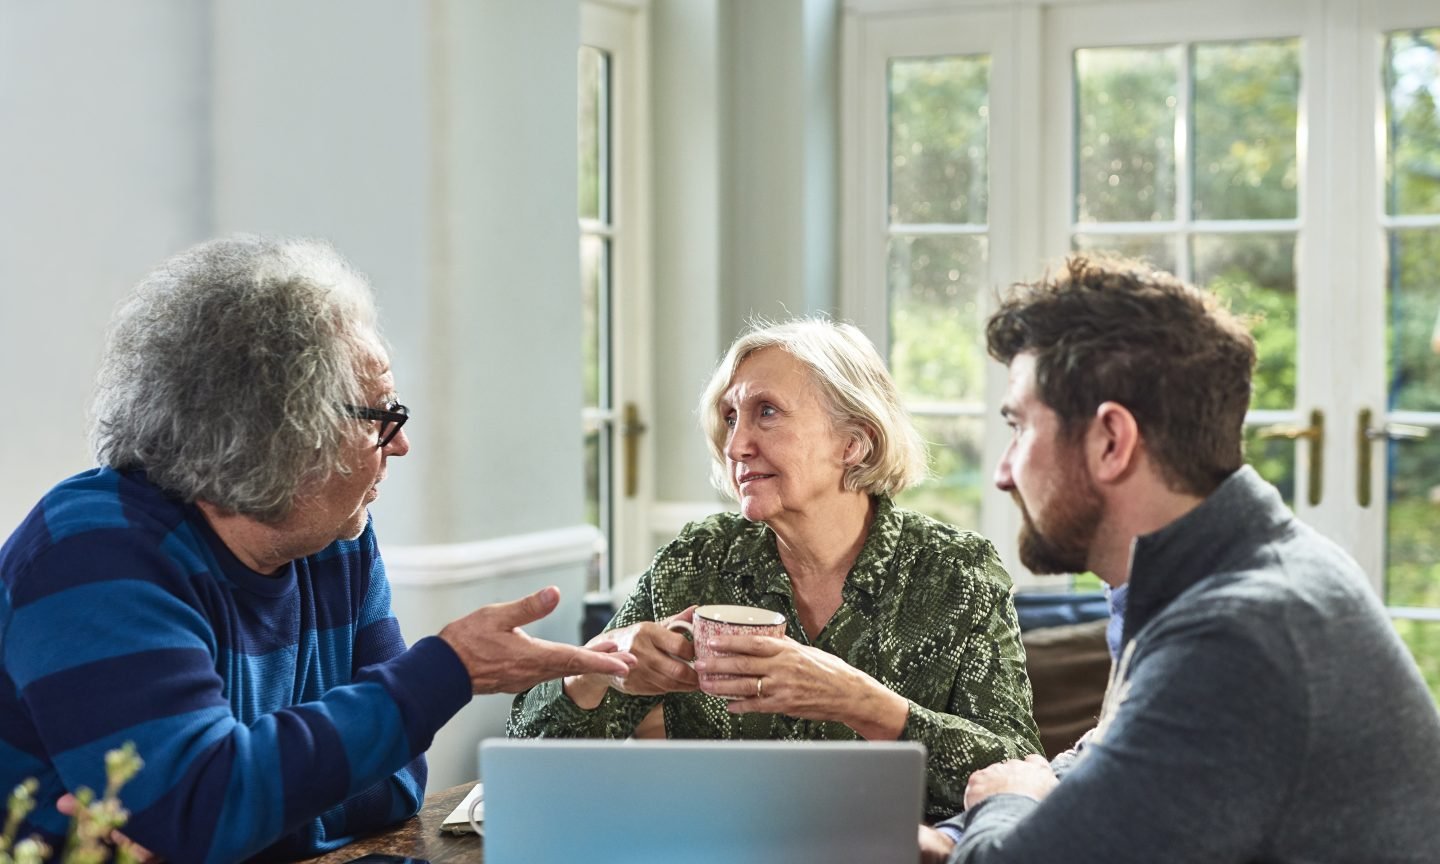 Ordering the Combo: Life Insurance with Long-Term Care Benefits